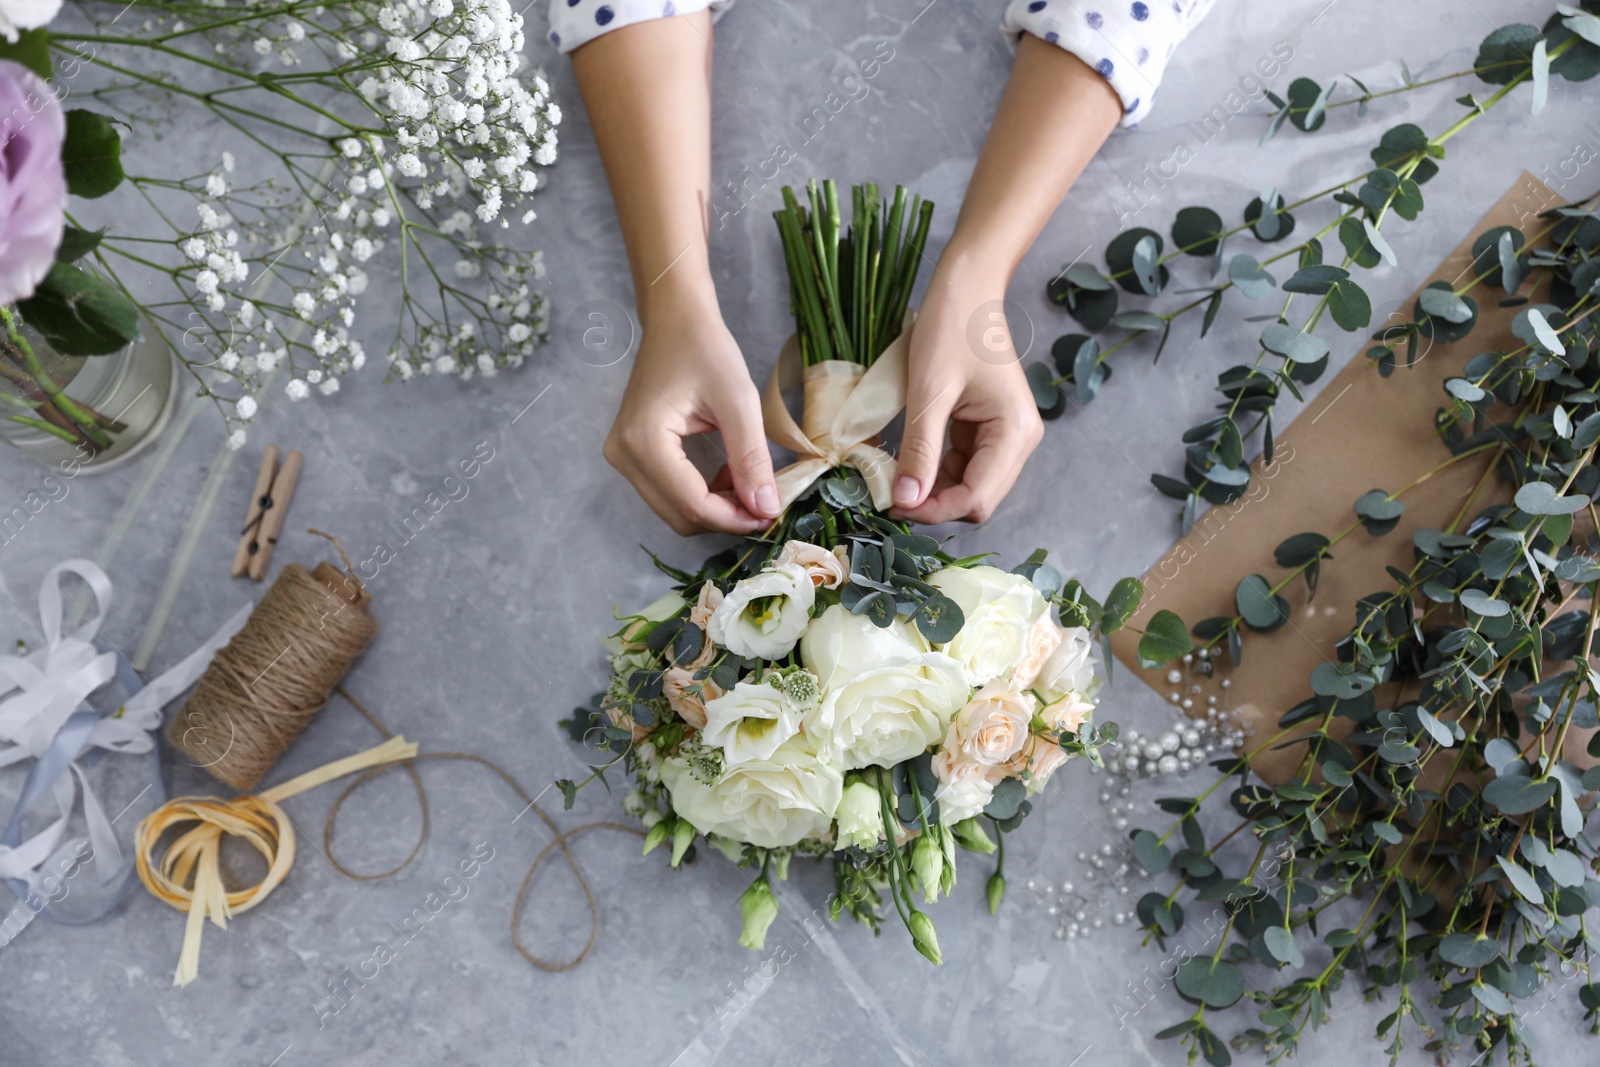 Photo of Florist tieing bow on beautiful wedding bouquet at light grey marble table, top view